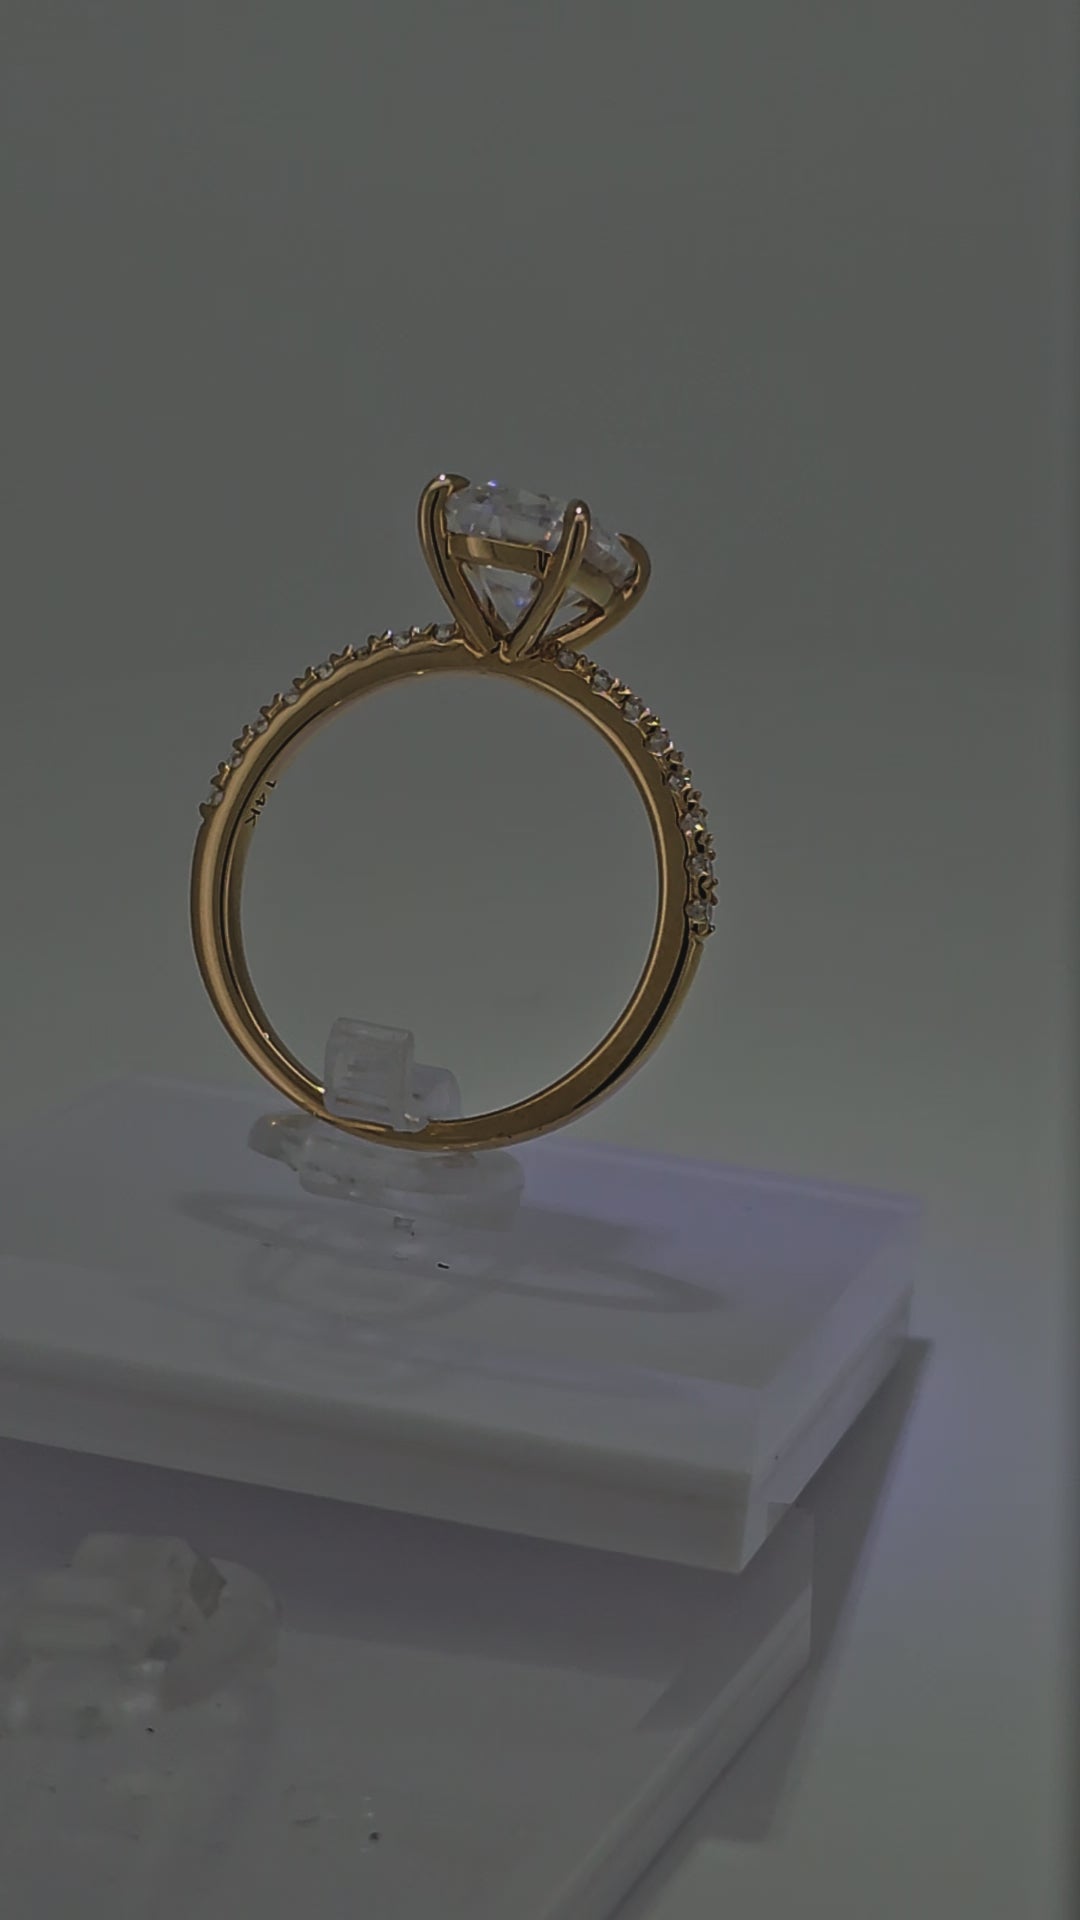 Video of Beautiful 14 Karat Solid Gold Cushion Cut Diamond Ring with Pave Band from Boujee Ice